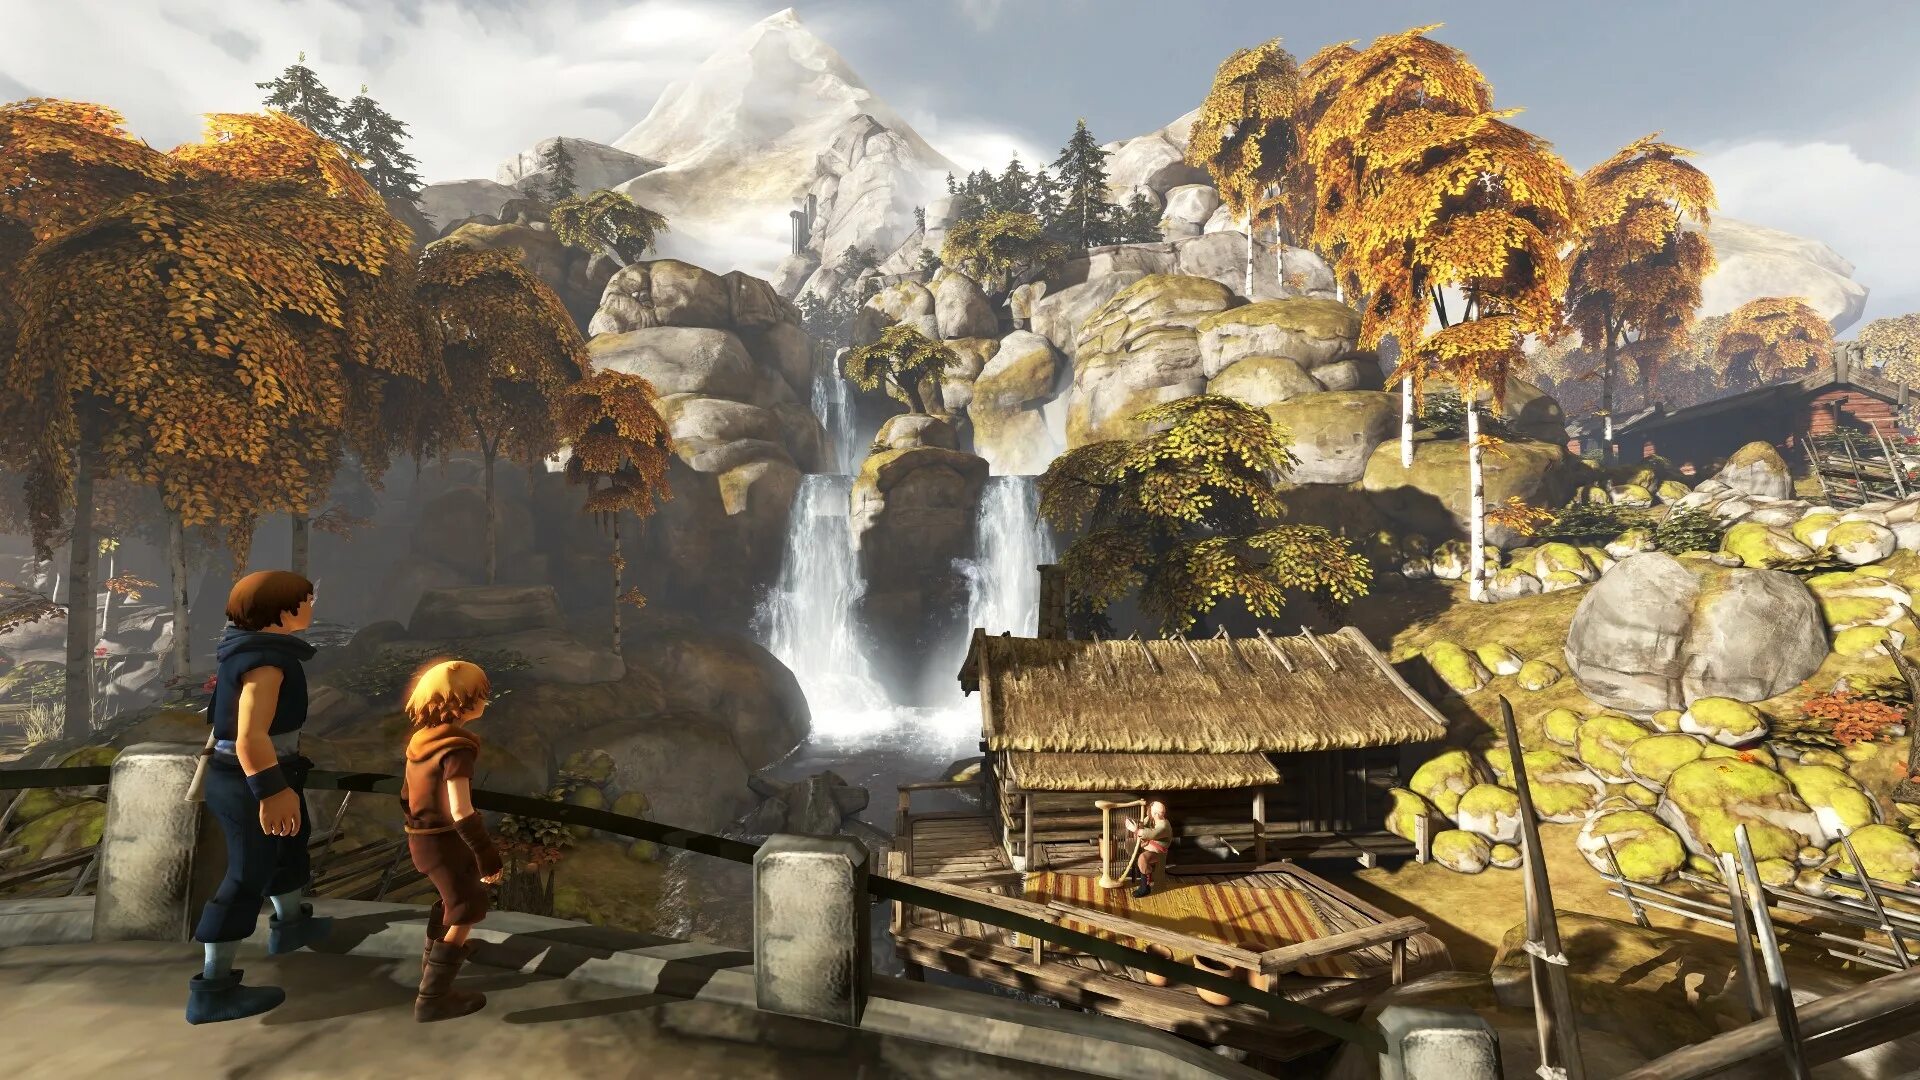 Two brothers игра. Игра brothers a Tale of two sons. Two brothers a Tale of two sons. Brothers a Tale of two sons Скриншоты. Brother a tale of two xbox